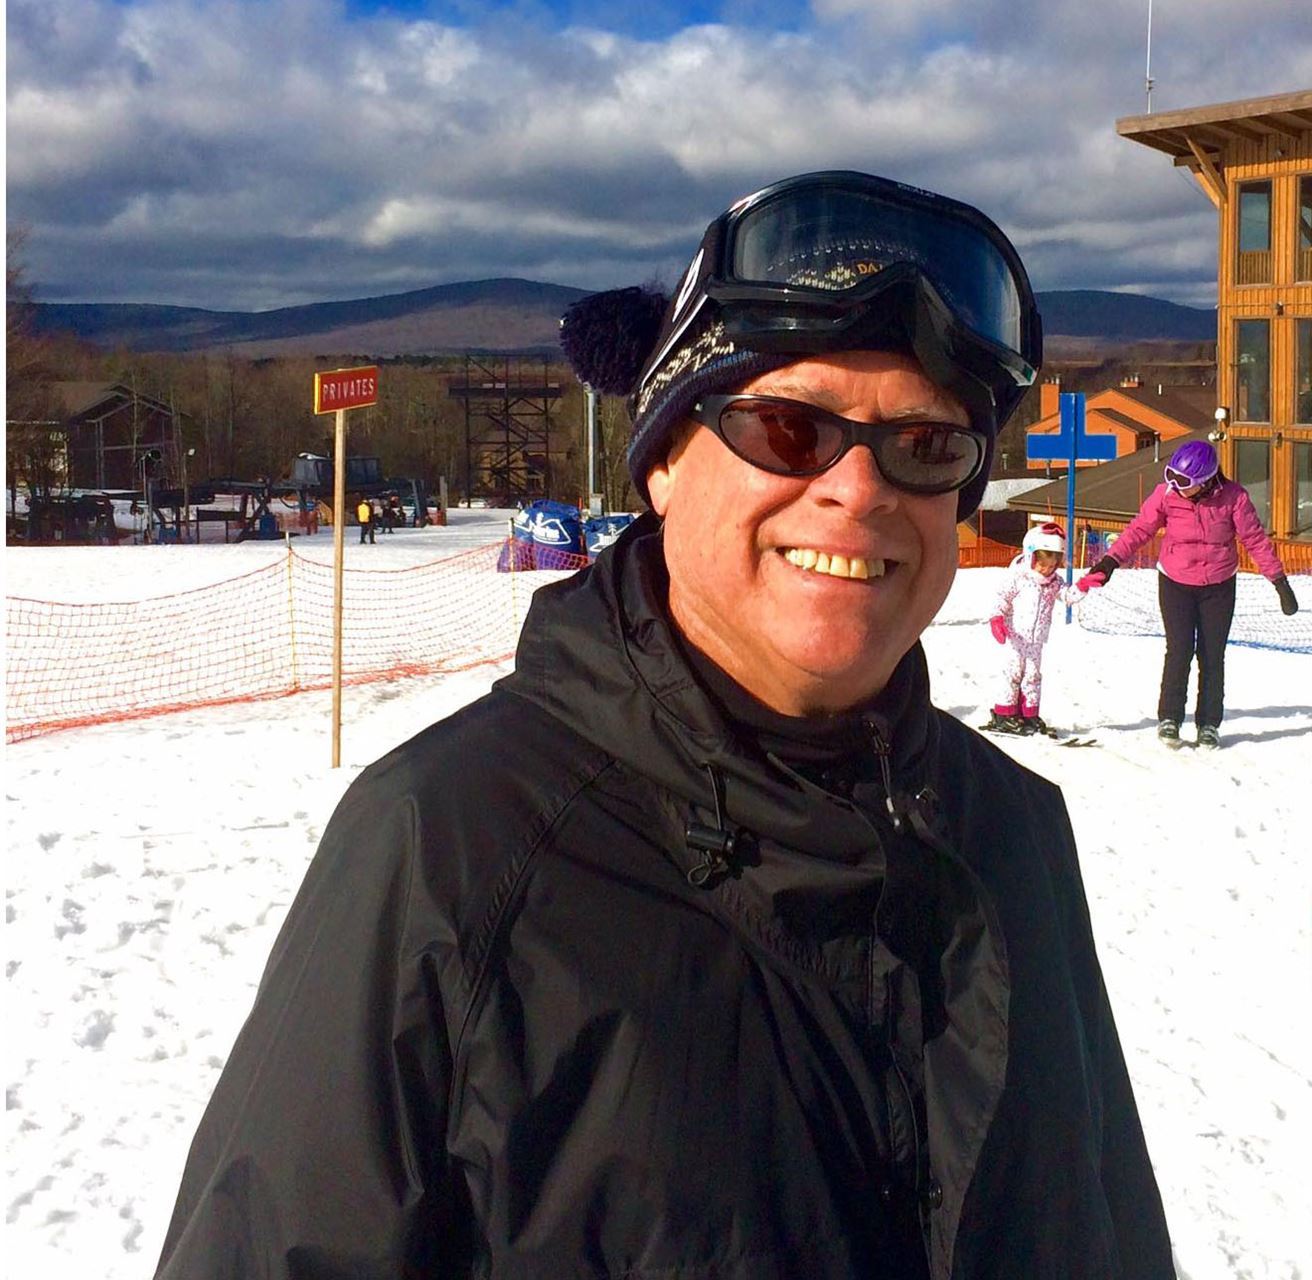 Kim is another great ski instructor